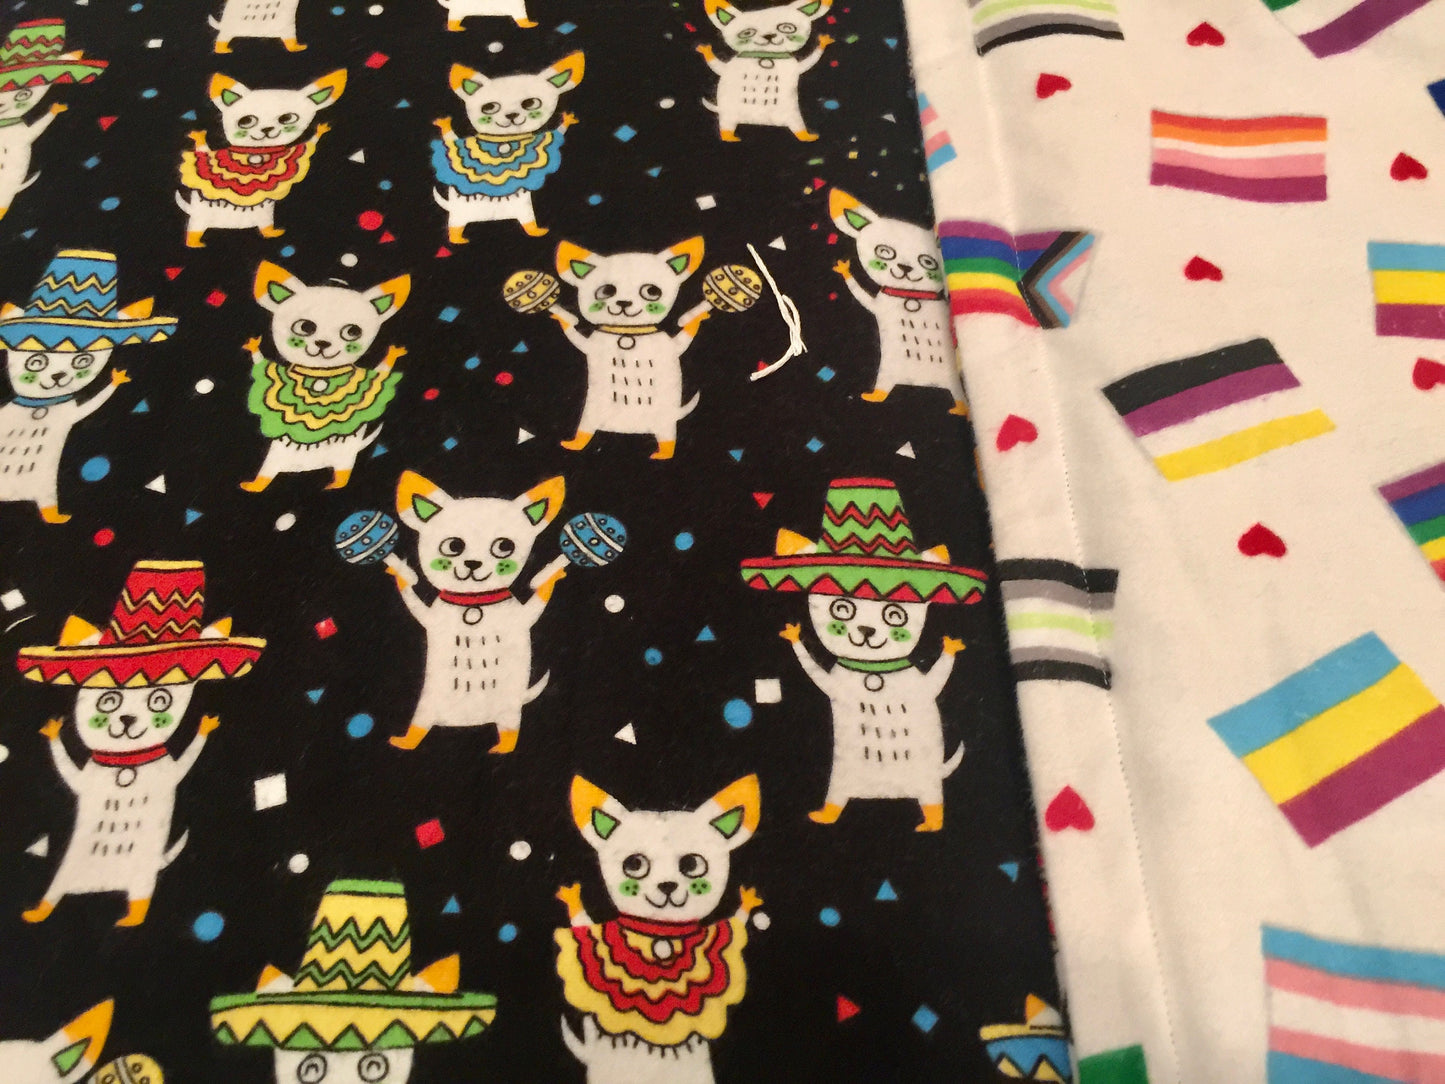 Cutest chihuahua fiesta party blanket ever!